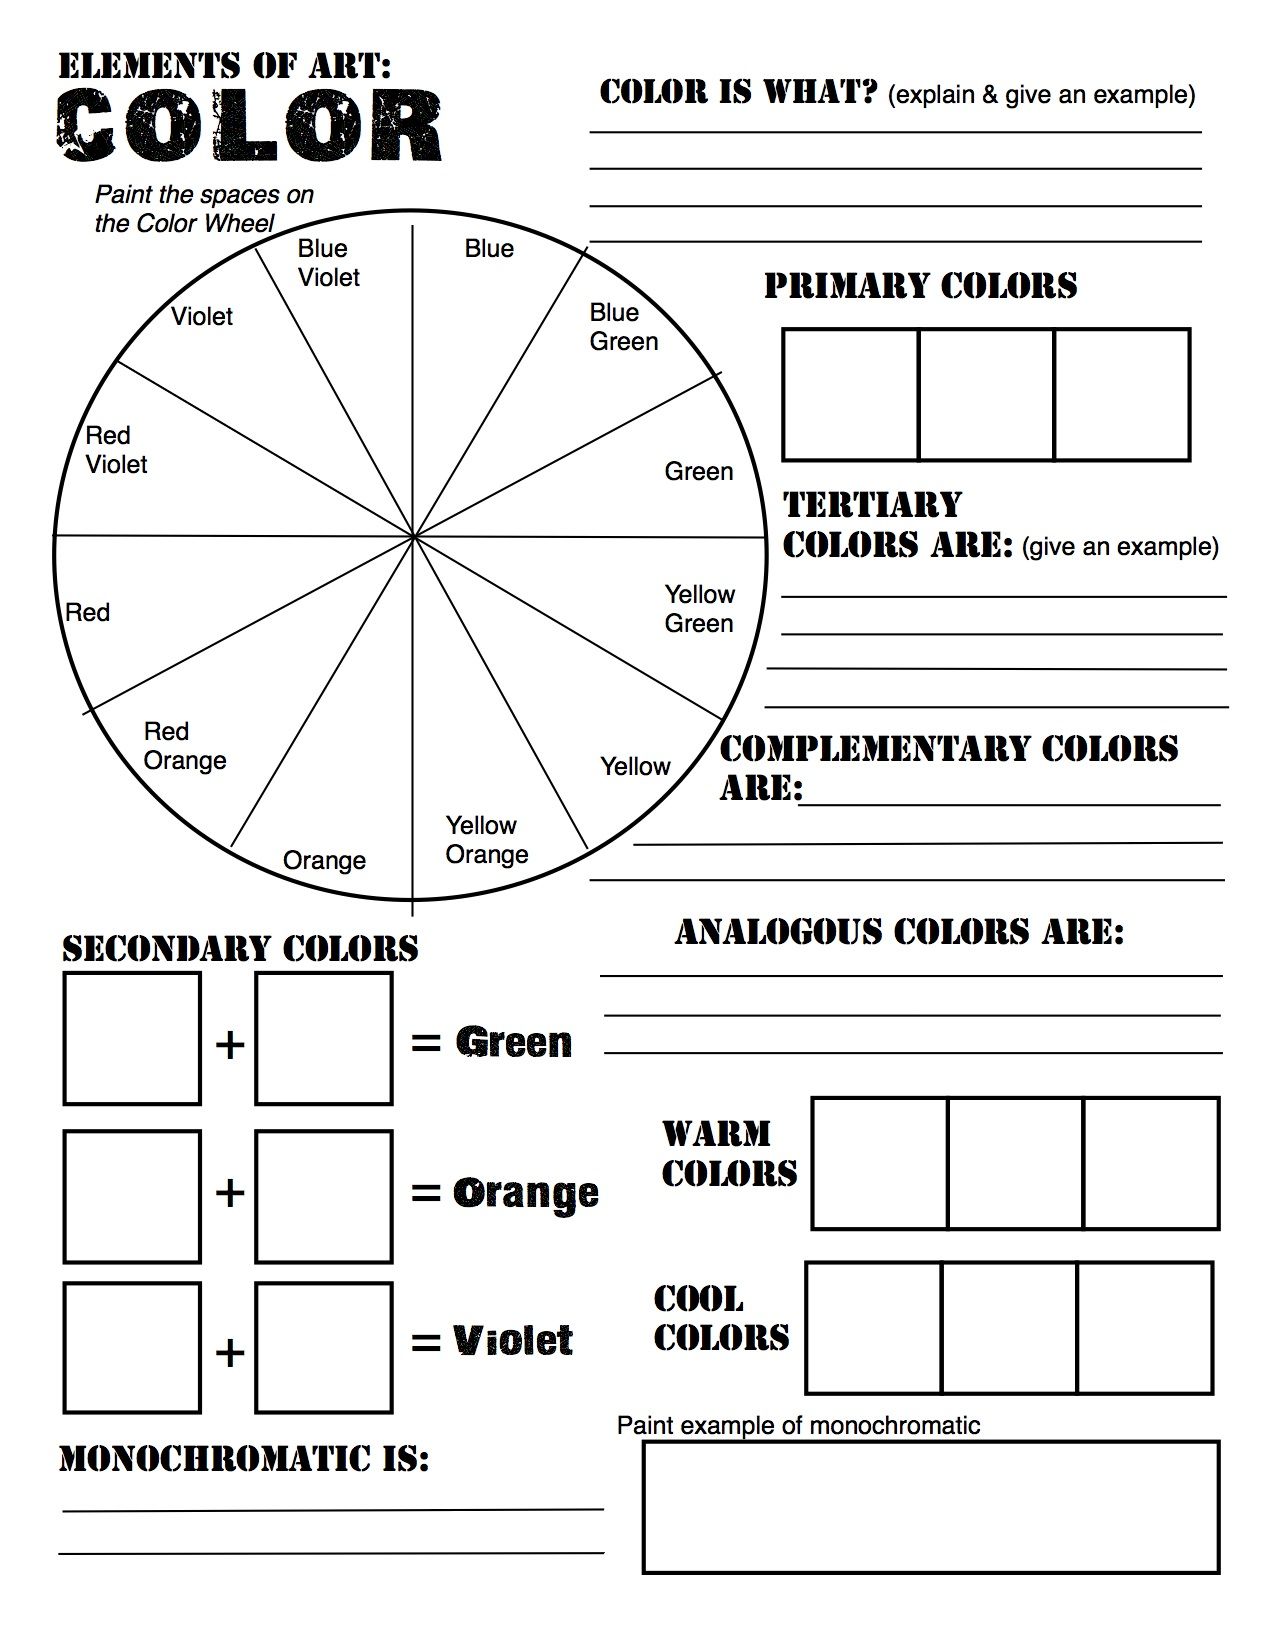 FREE Elements of Art Color Wheel Worksheet and Lesson! Art